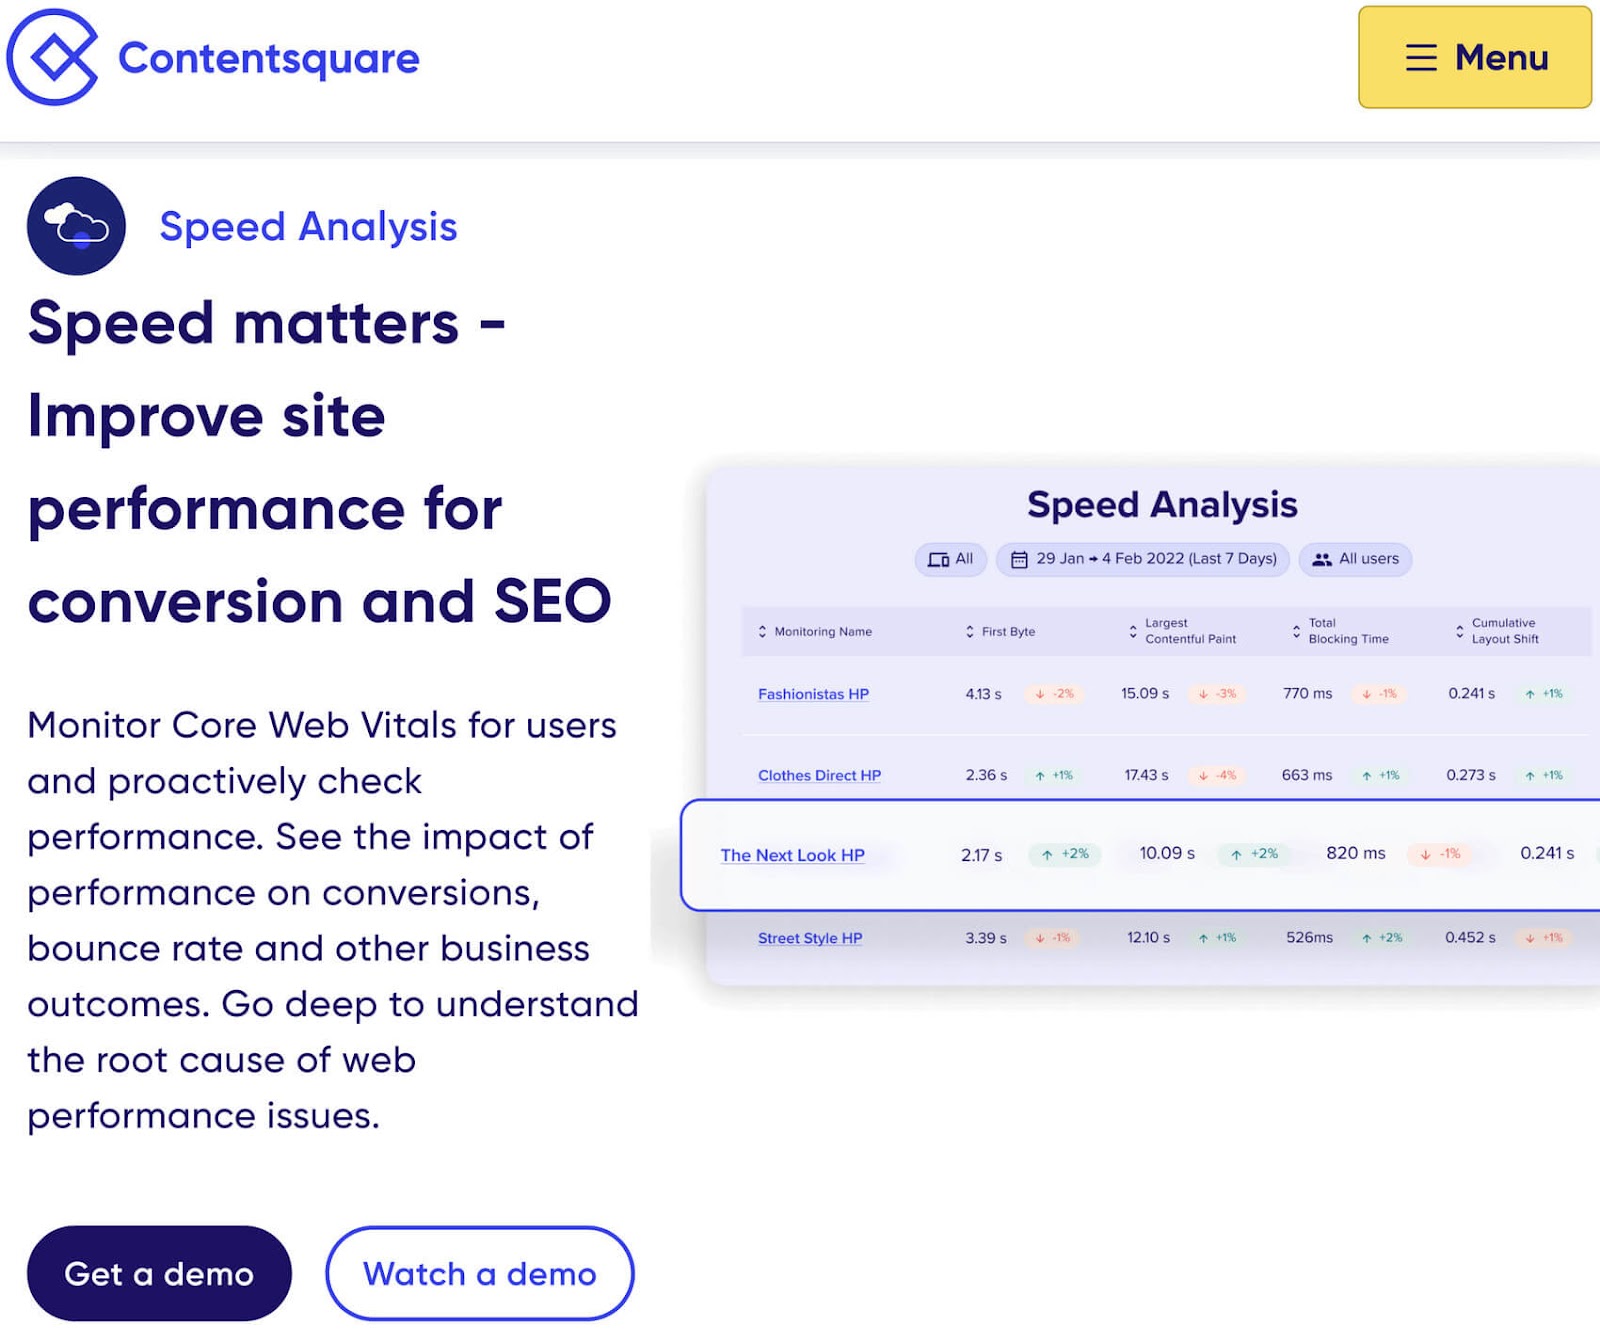 Contentsquare's Speed Analysis tool page with performance metrics for different websites and options to get or watch a demo.